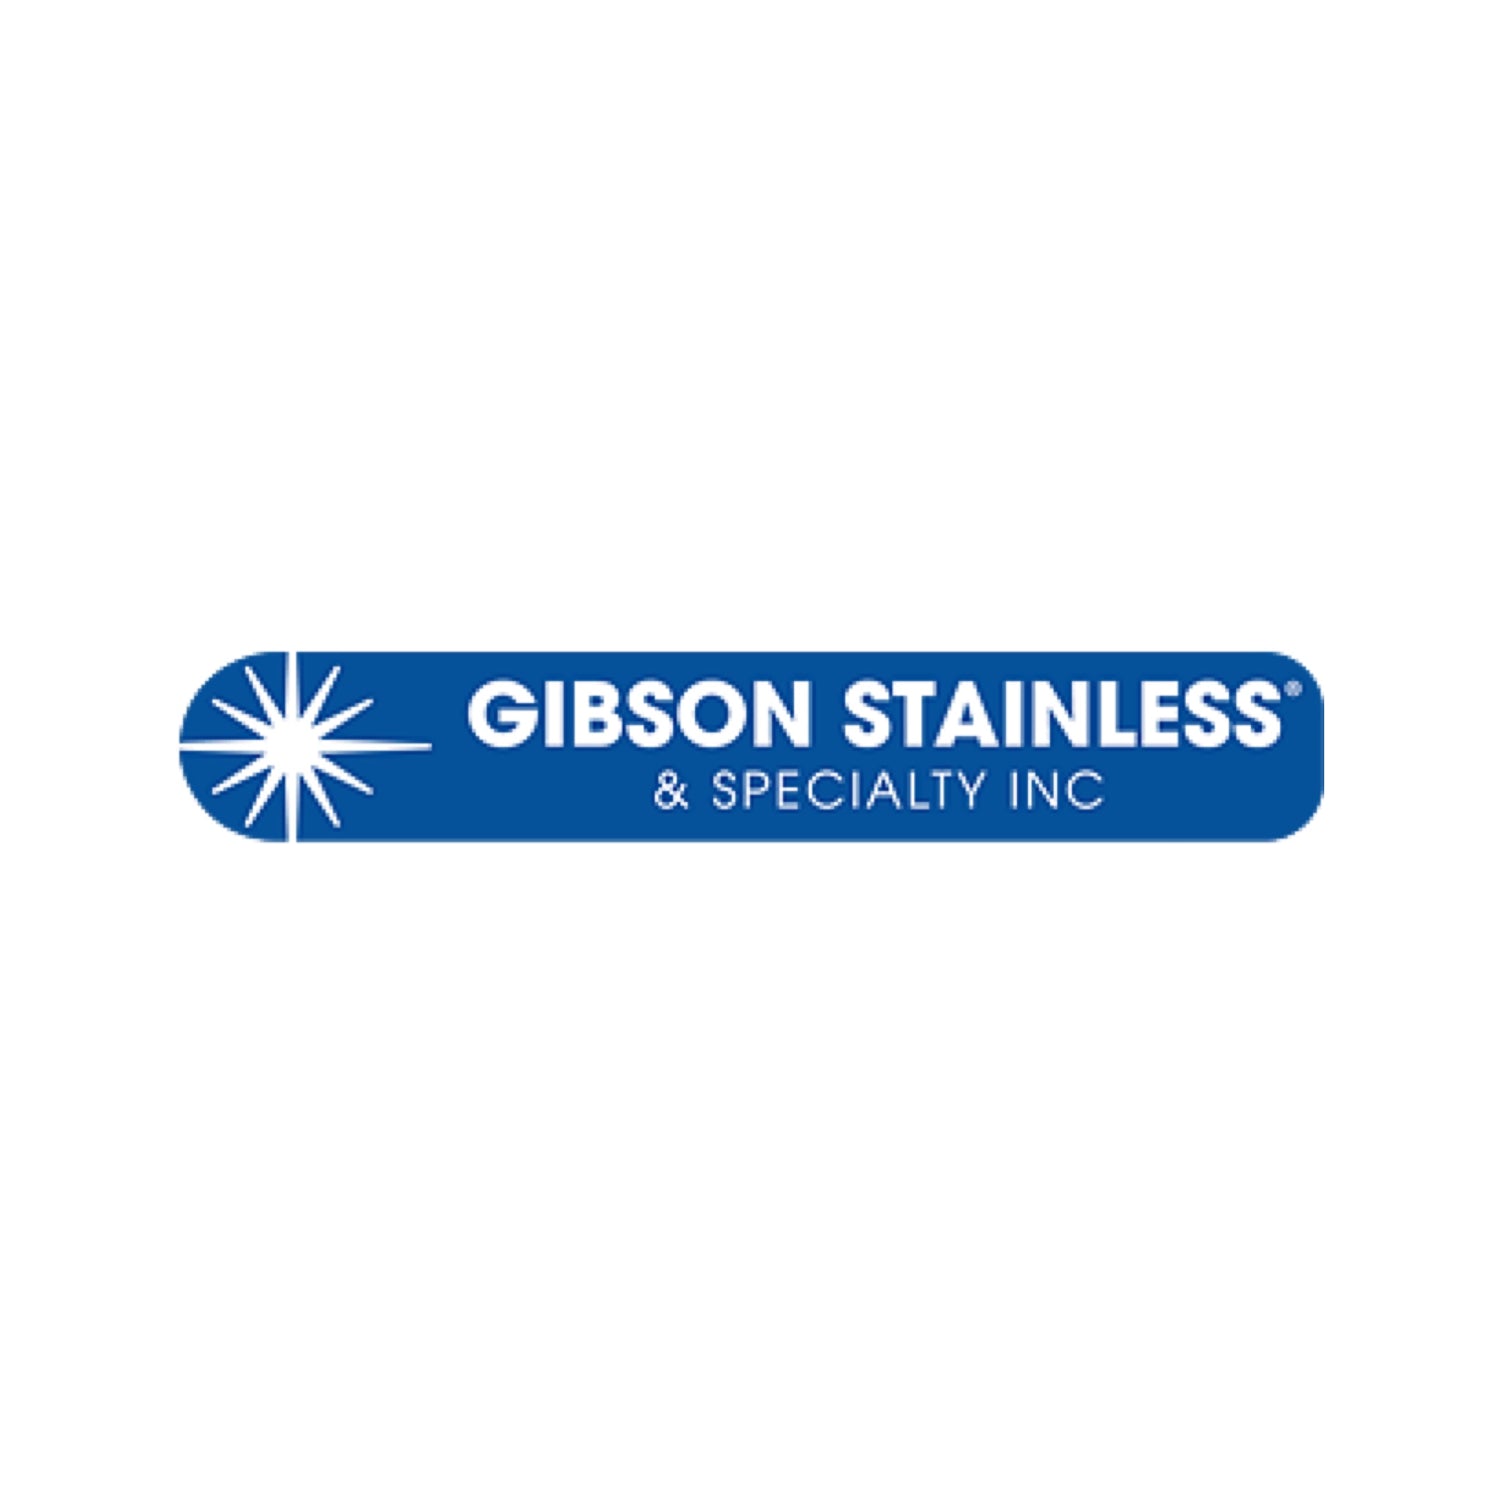 GIBSON STAINLESS & SPECIALTY INC.